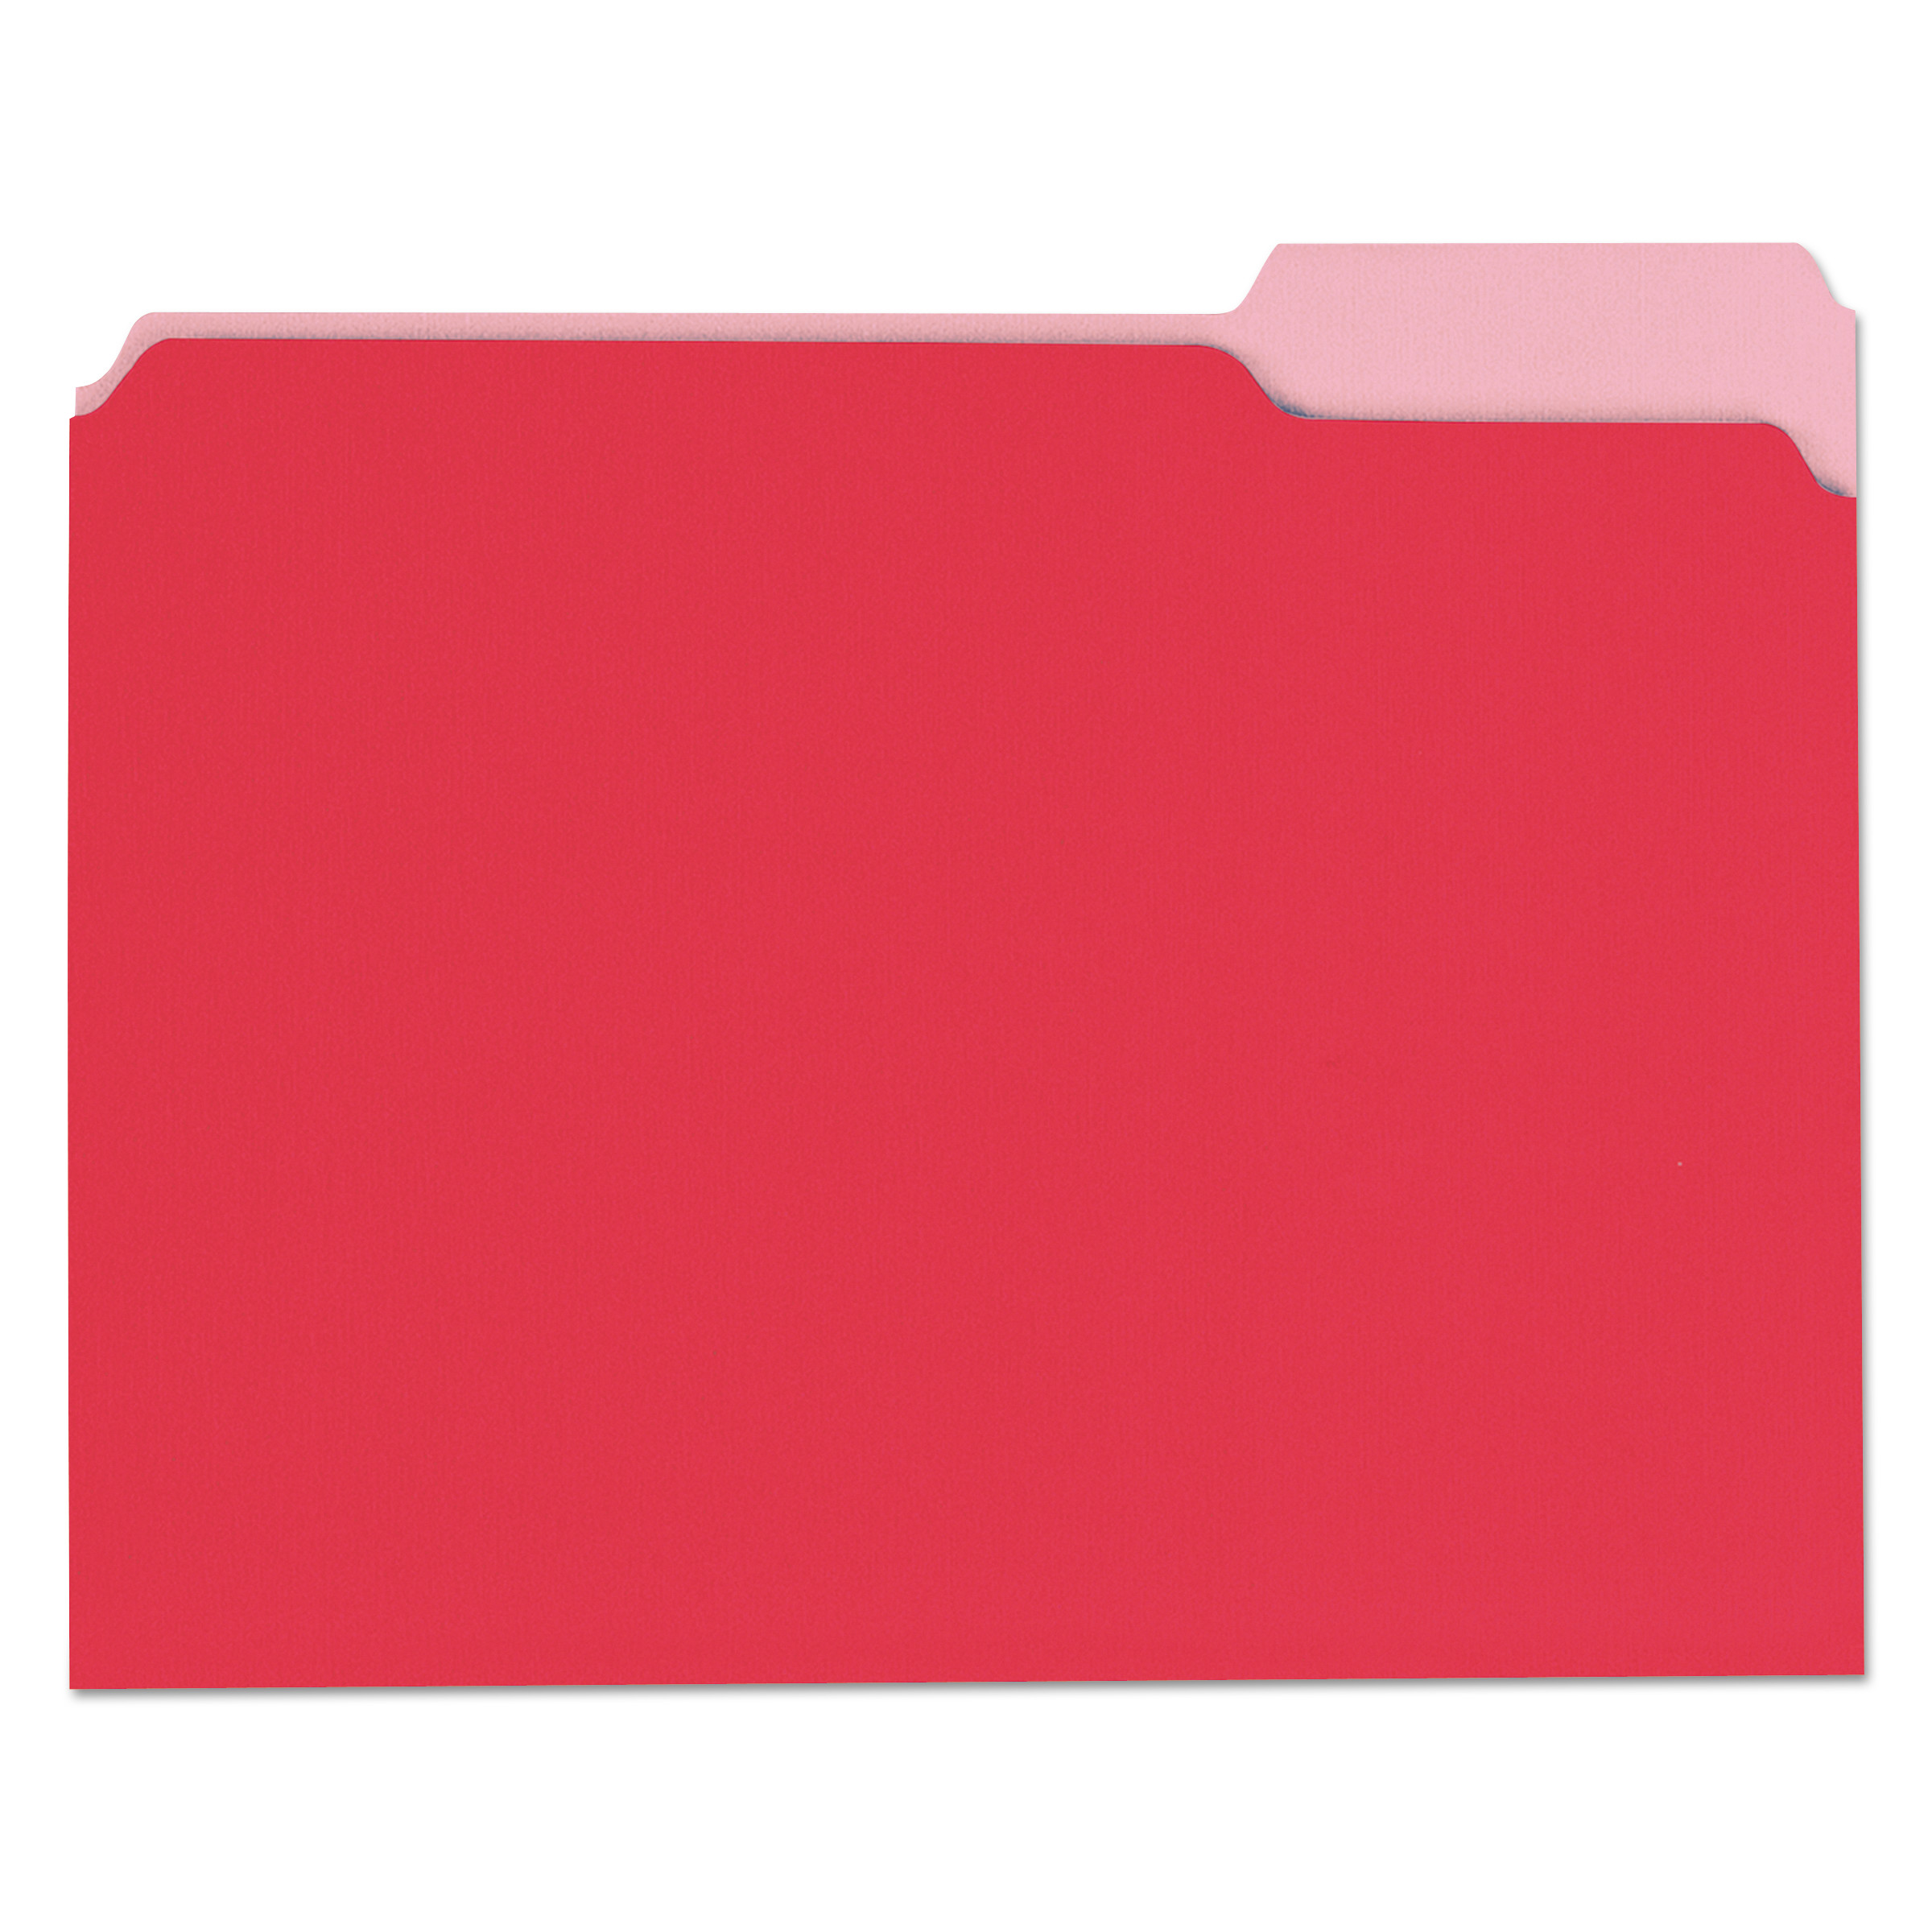  Universal UNV10503 Deluxe Colored Top Tab File Folders, 1/3-Cut Tabs, Letter Size, Red/Light Red, 100/Box (UNV10503) 